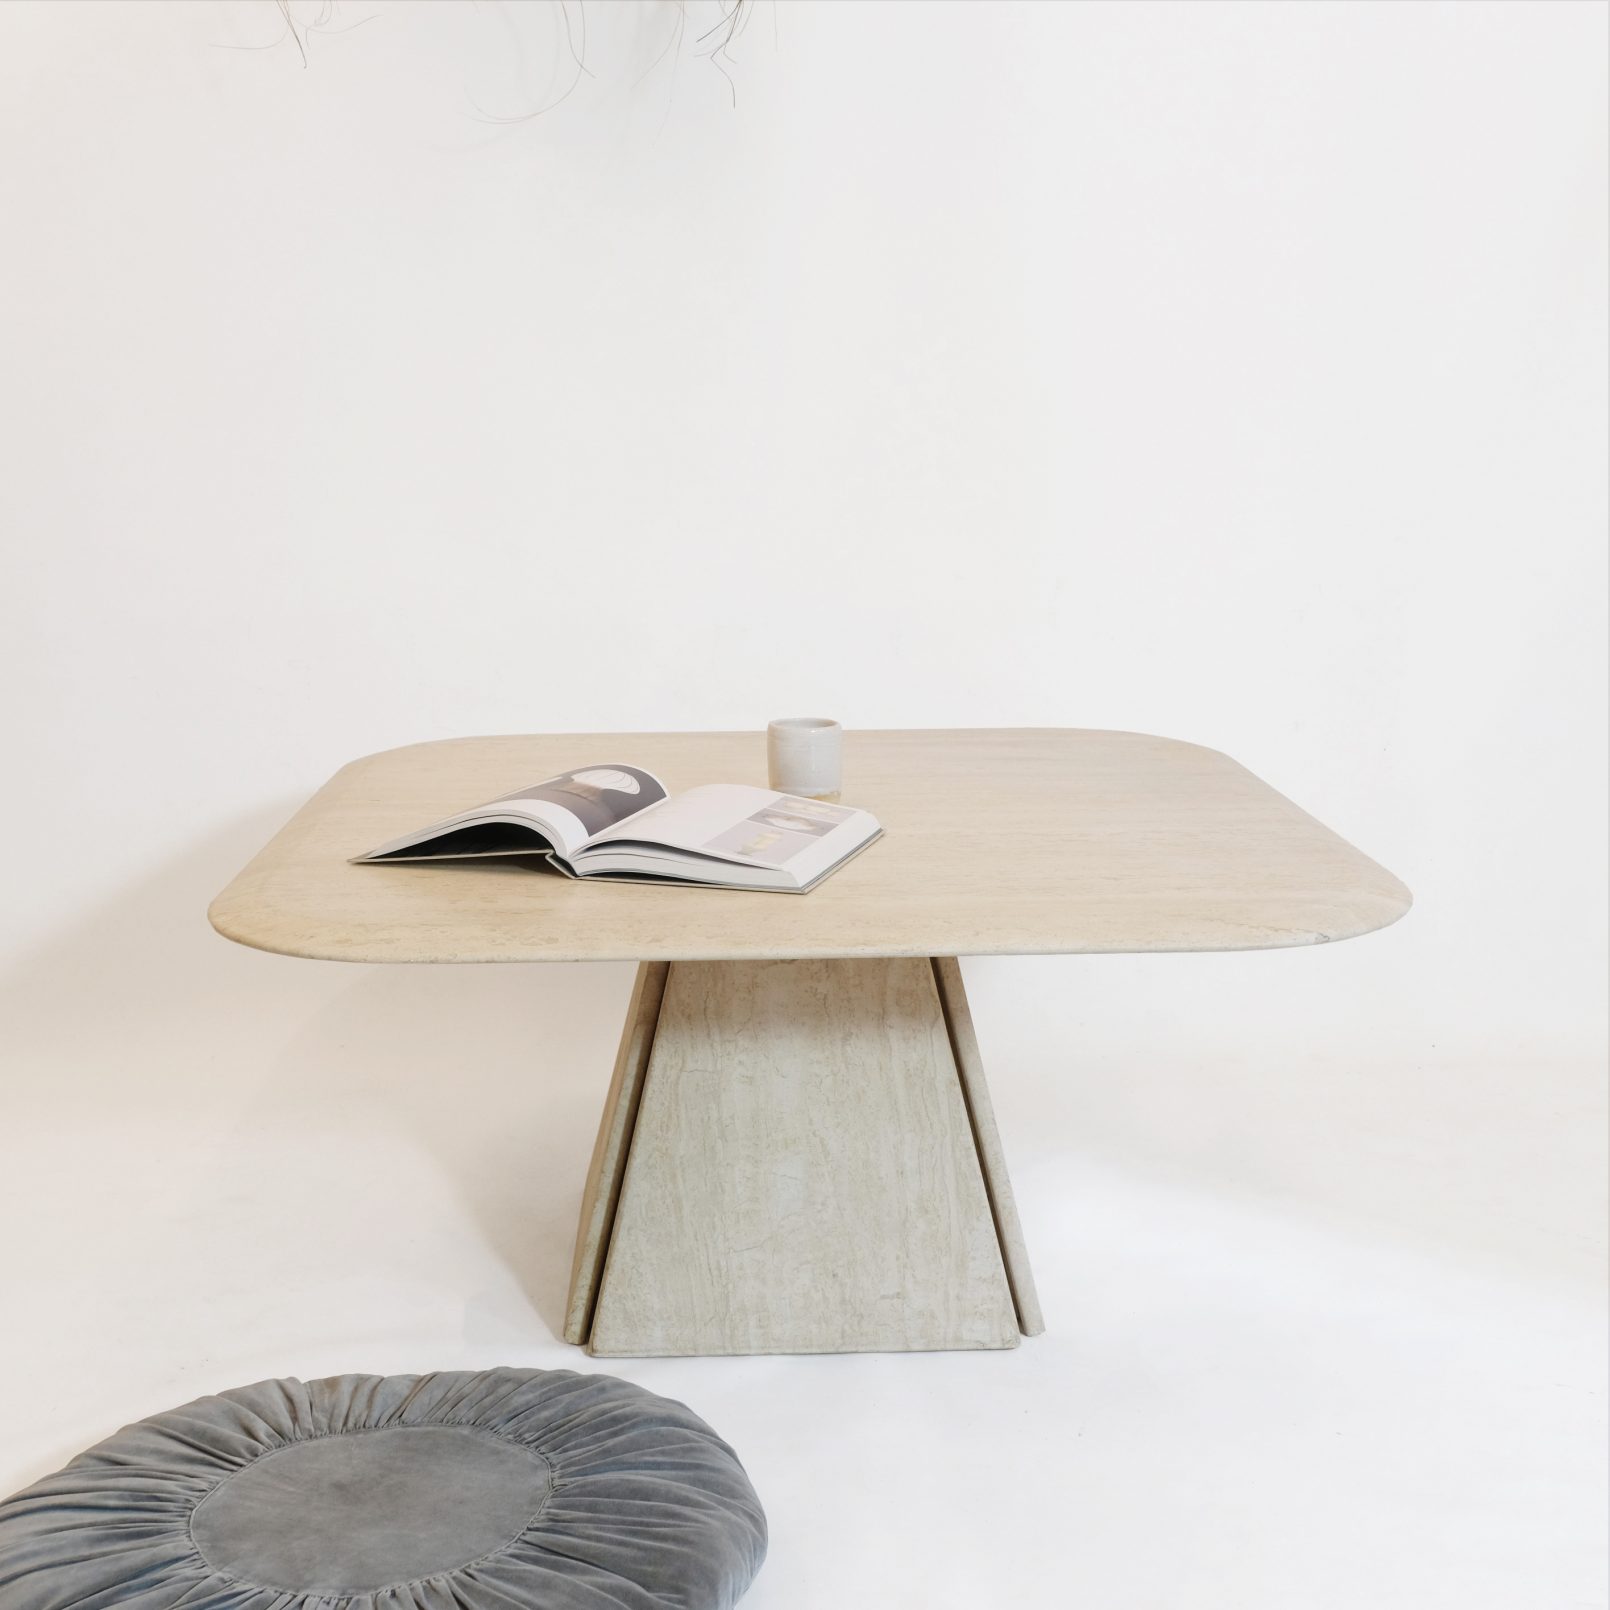 Travertine coffee table, Italian work from the 1970s.